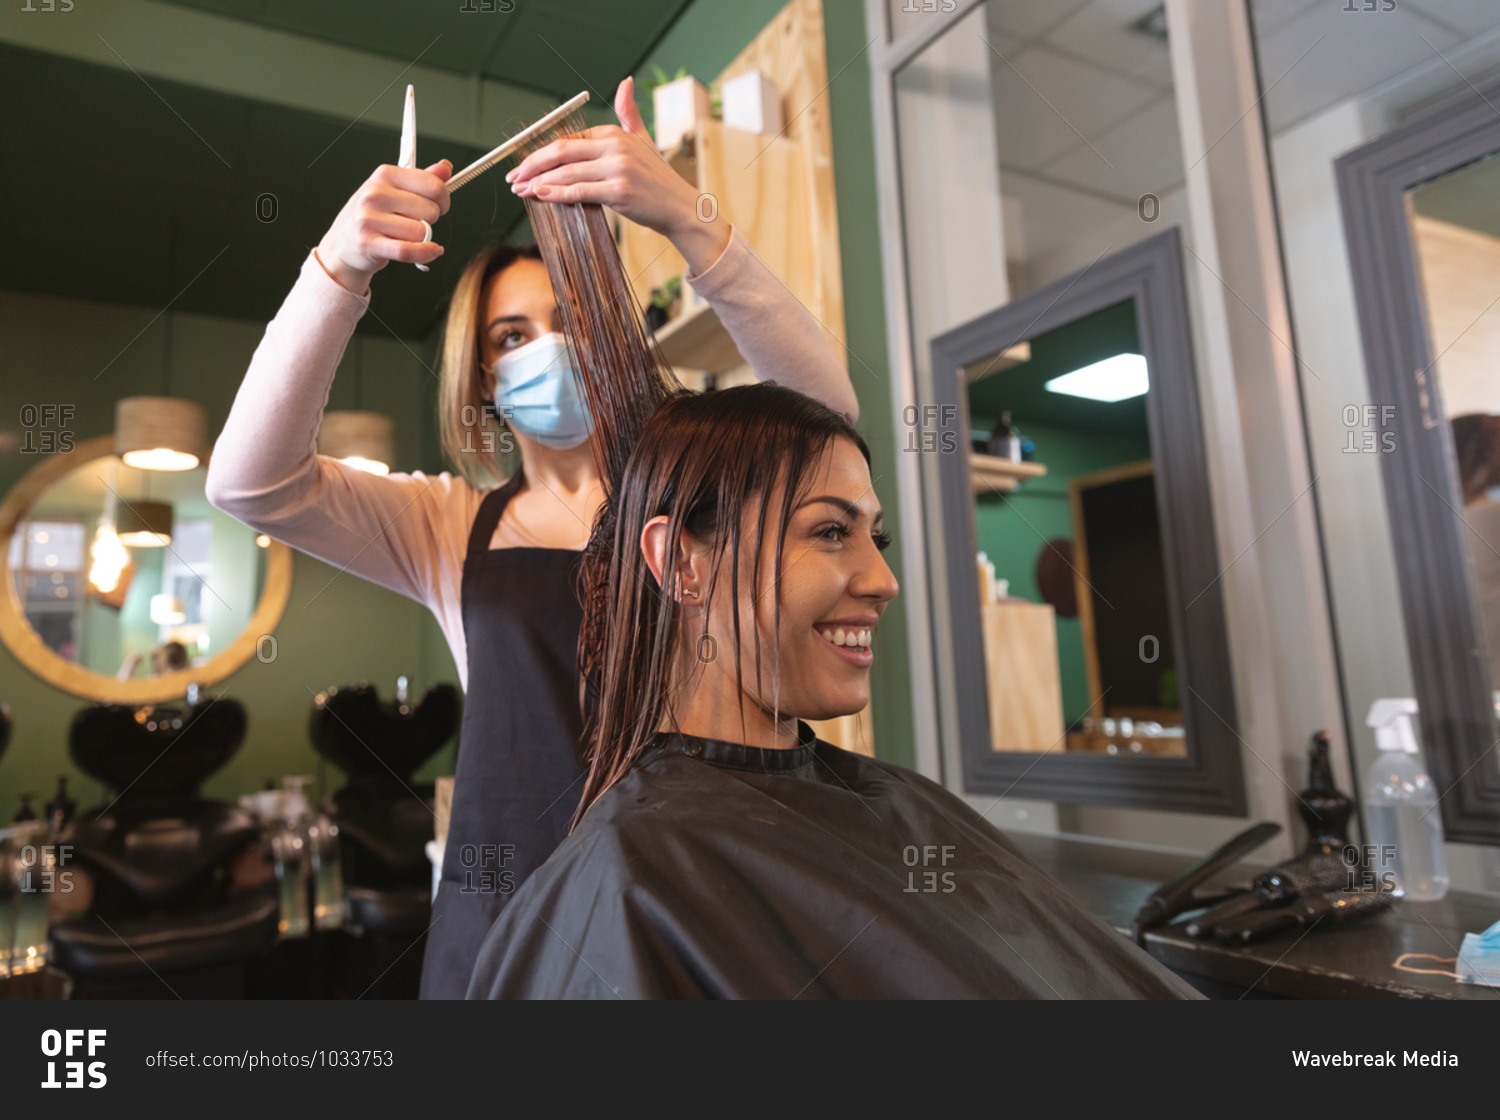 Caucasian female hairdresser working in hair salon wearing face mask, cutting hair of female Caucasian customer. Health and hygiene in workplace during Coronavirus Covid 19 pandemic.